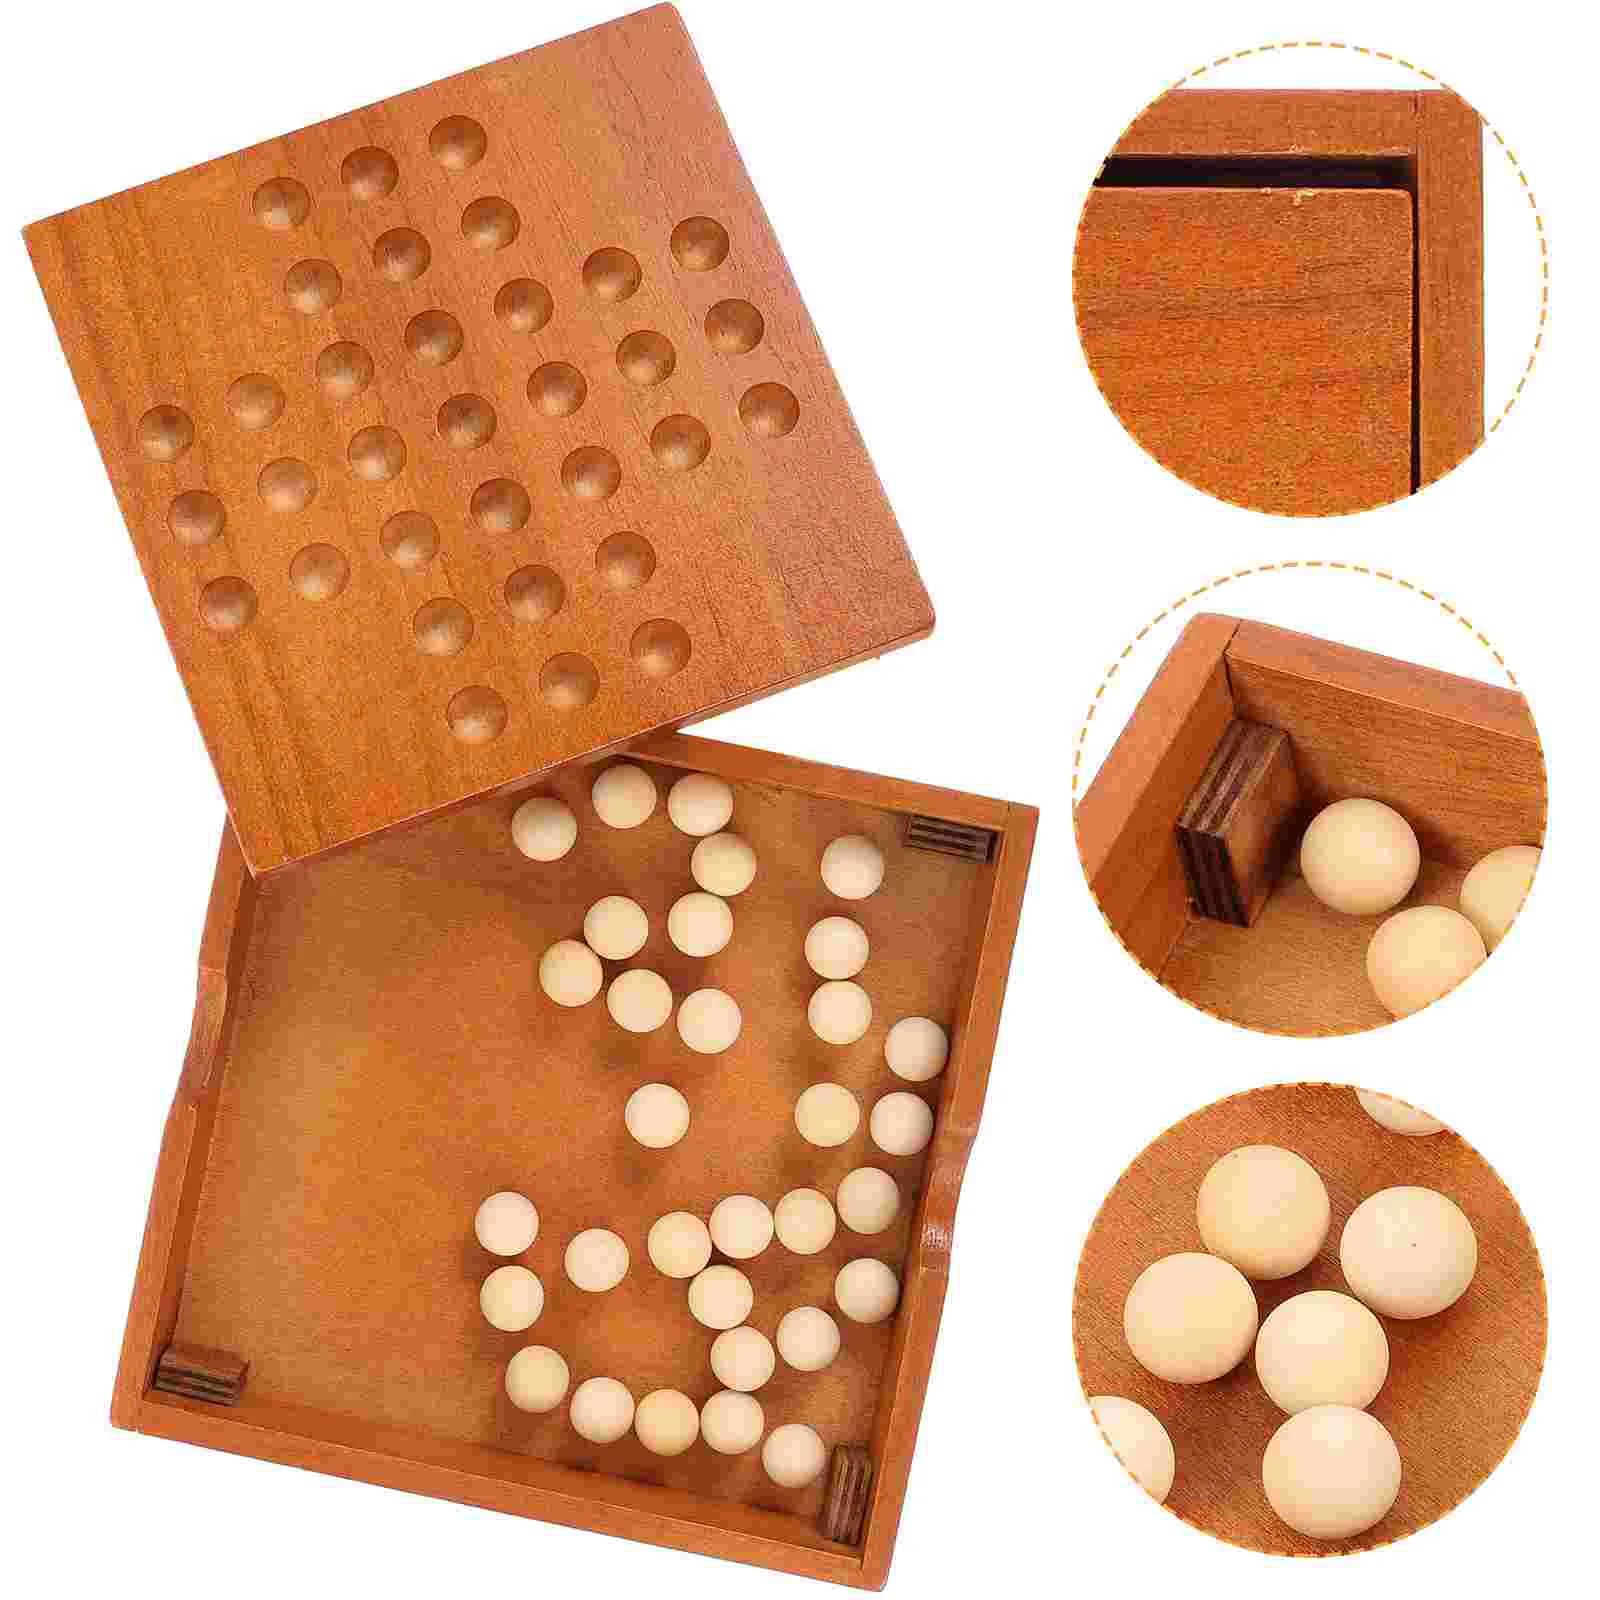 Wooden Chess Set for Adults - Classic Board Game with Peg Solitaire and Marble Games Included